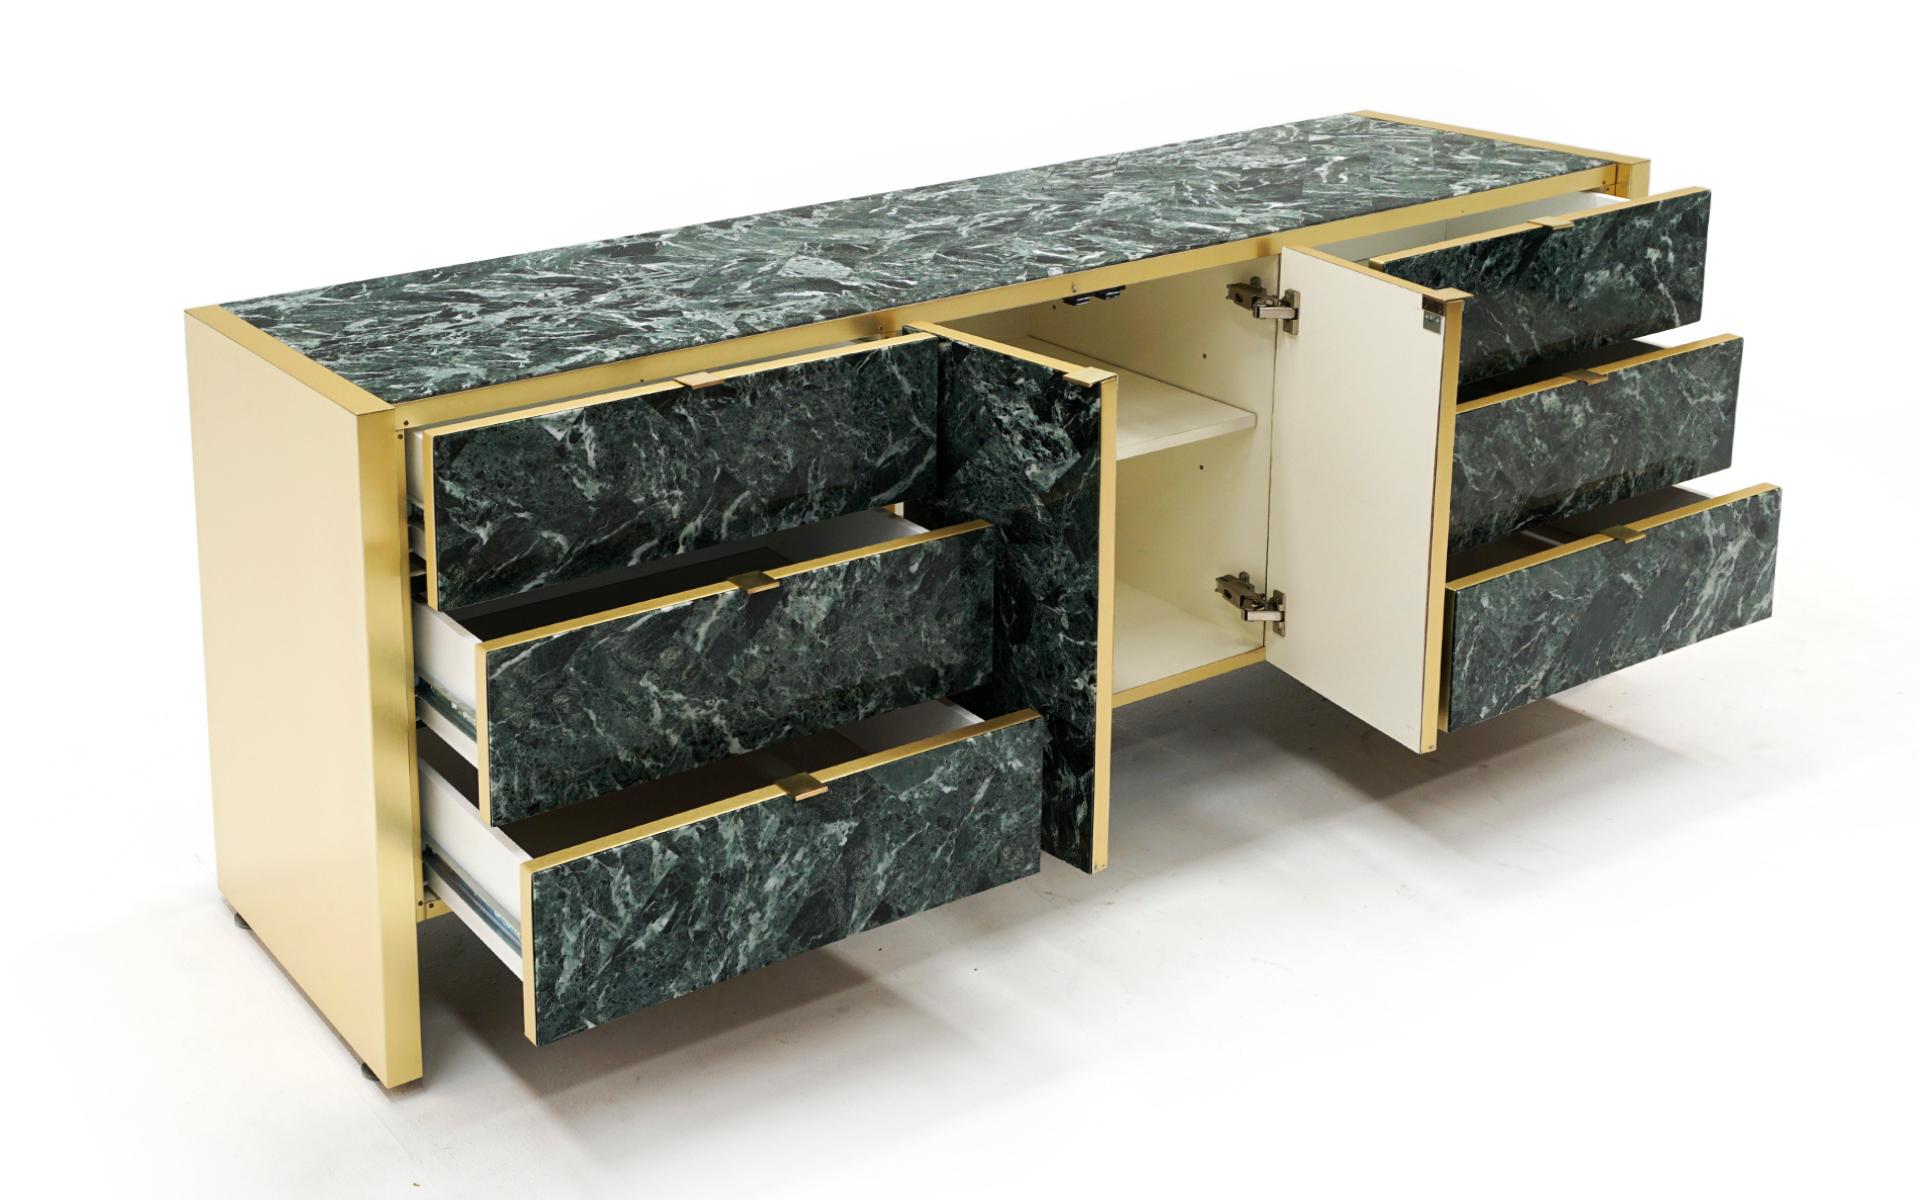 Hollywood Regency Ello Storage Cabinet, Credenza, Dresser in Tessellated Green Marble and Brass